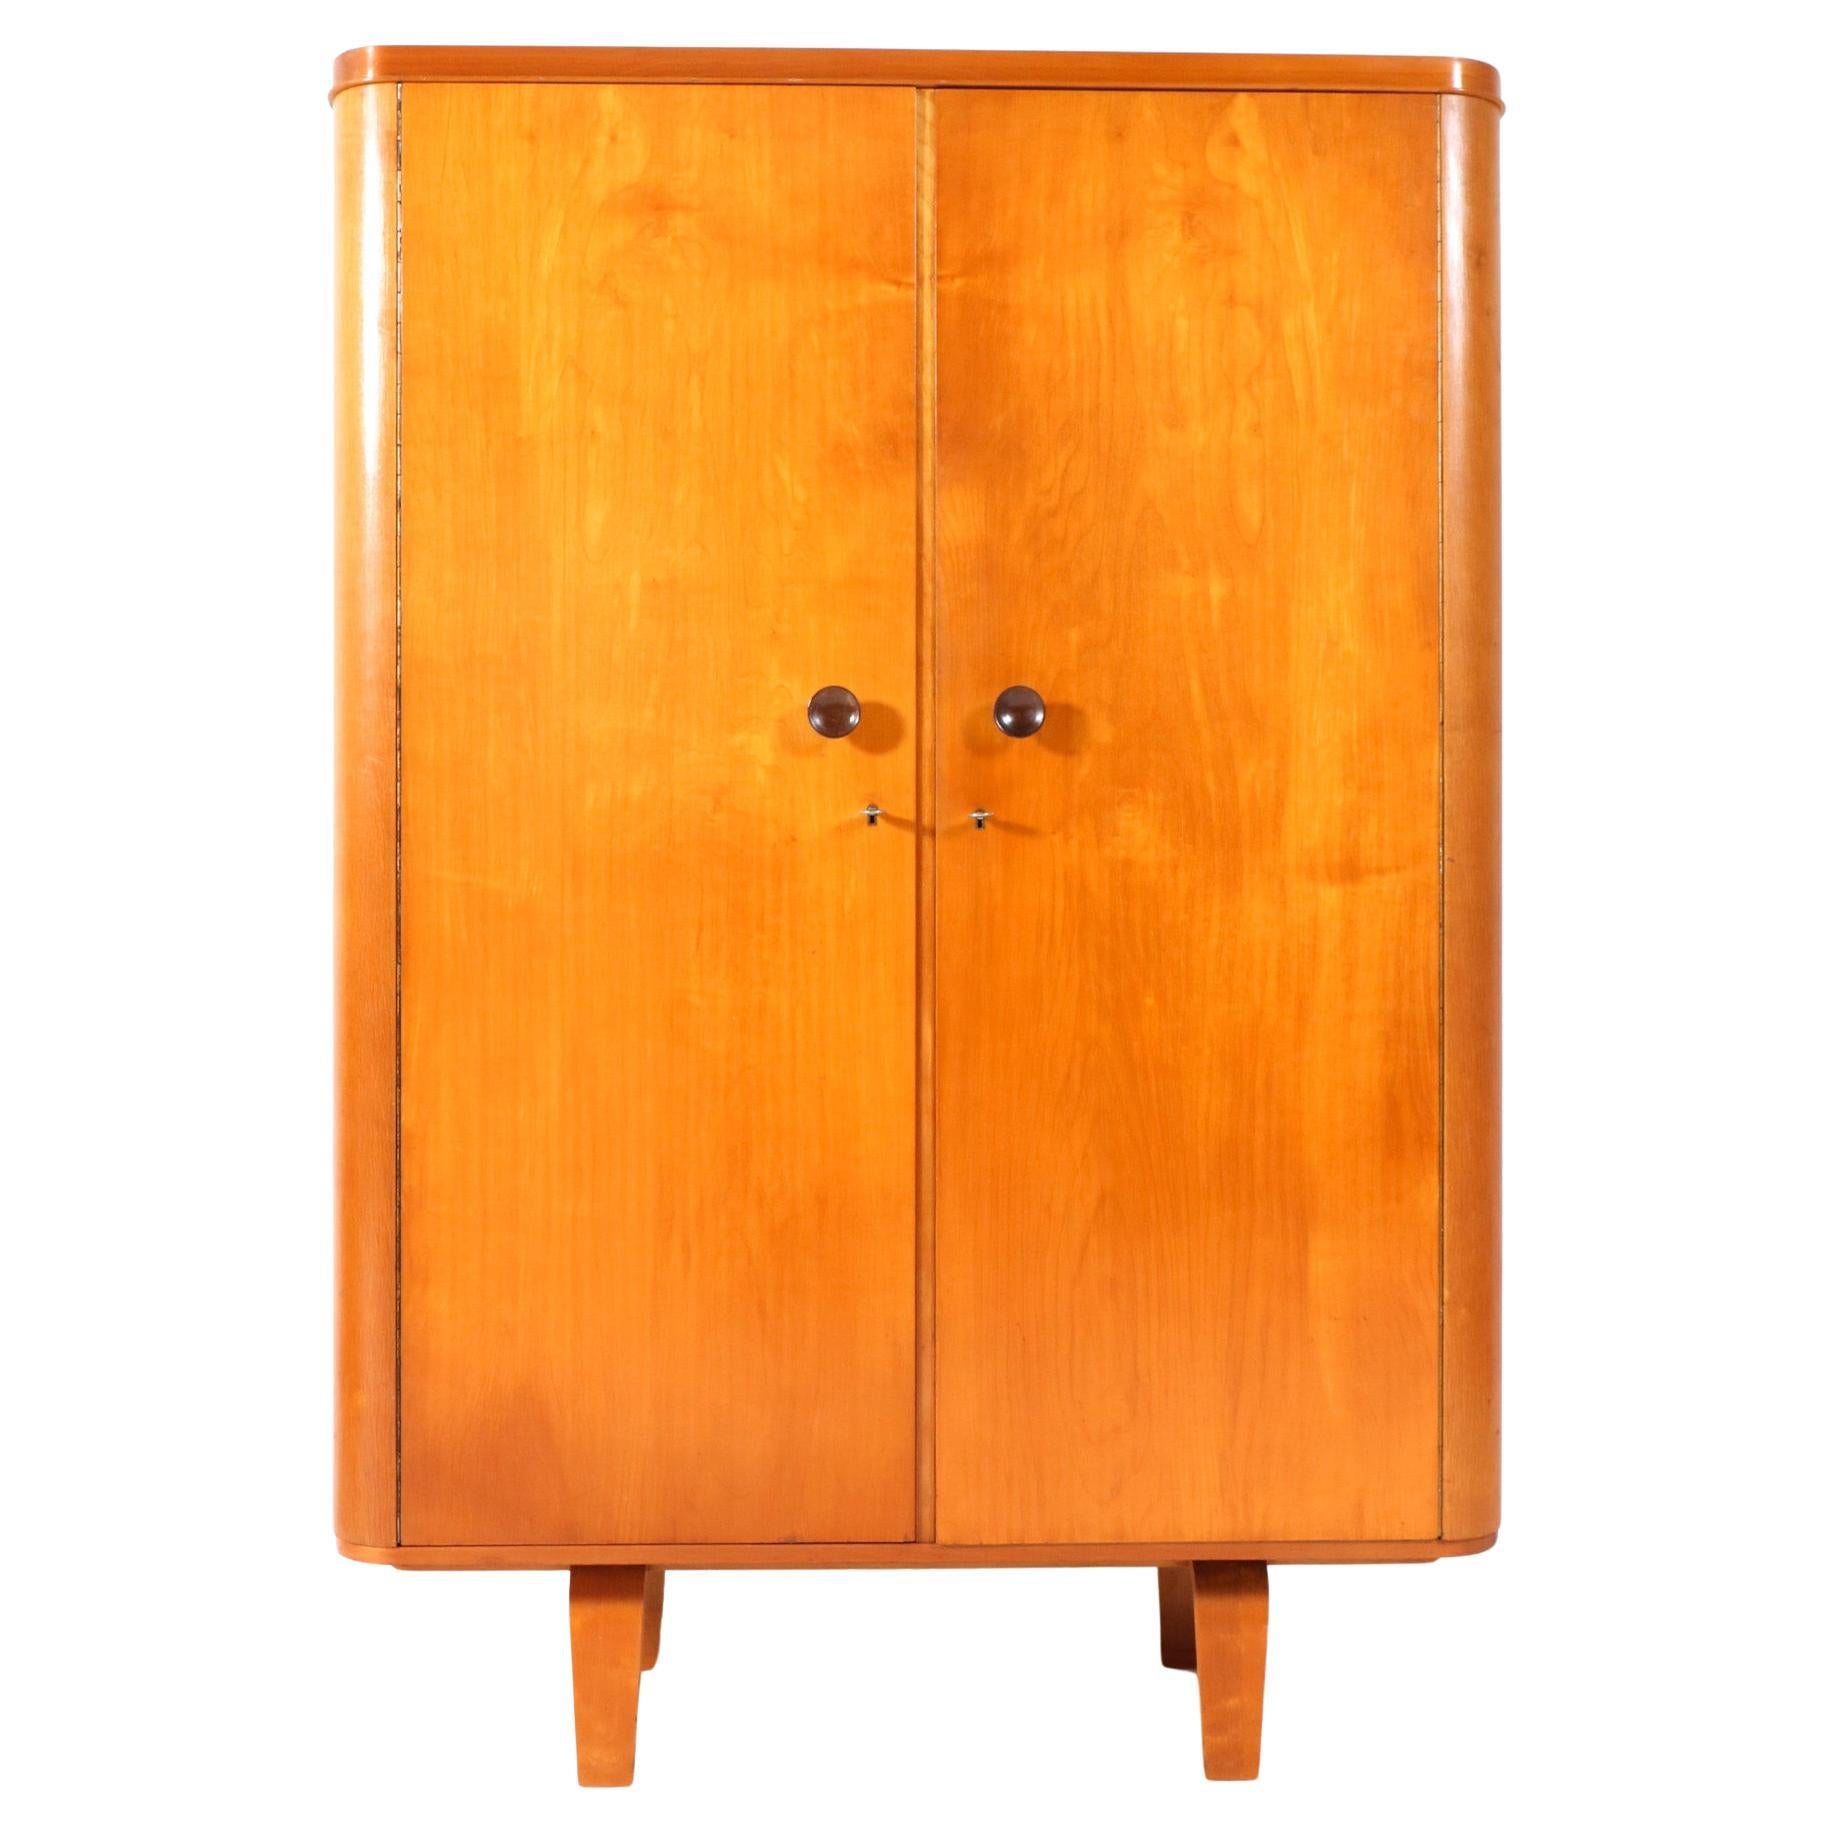 Birch Plywood Mid-Century Modern Armoire by Cor Alons for Den Boer Gouda, 1949